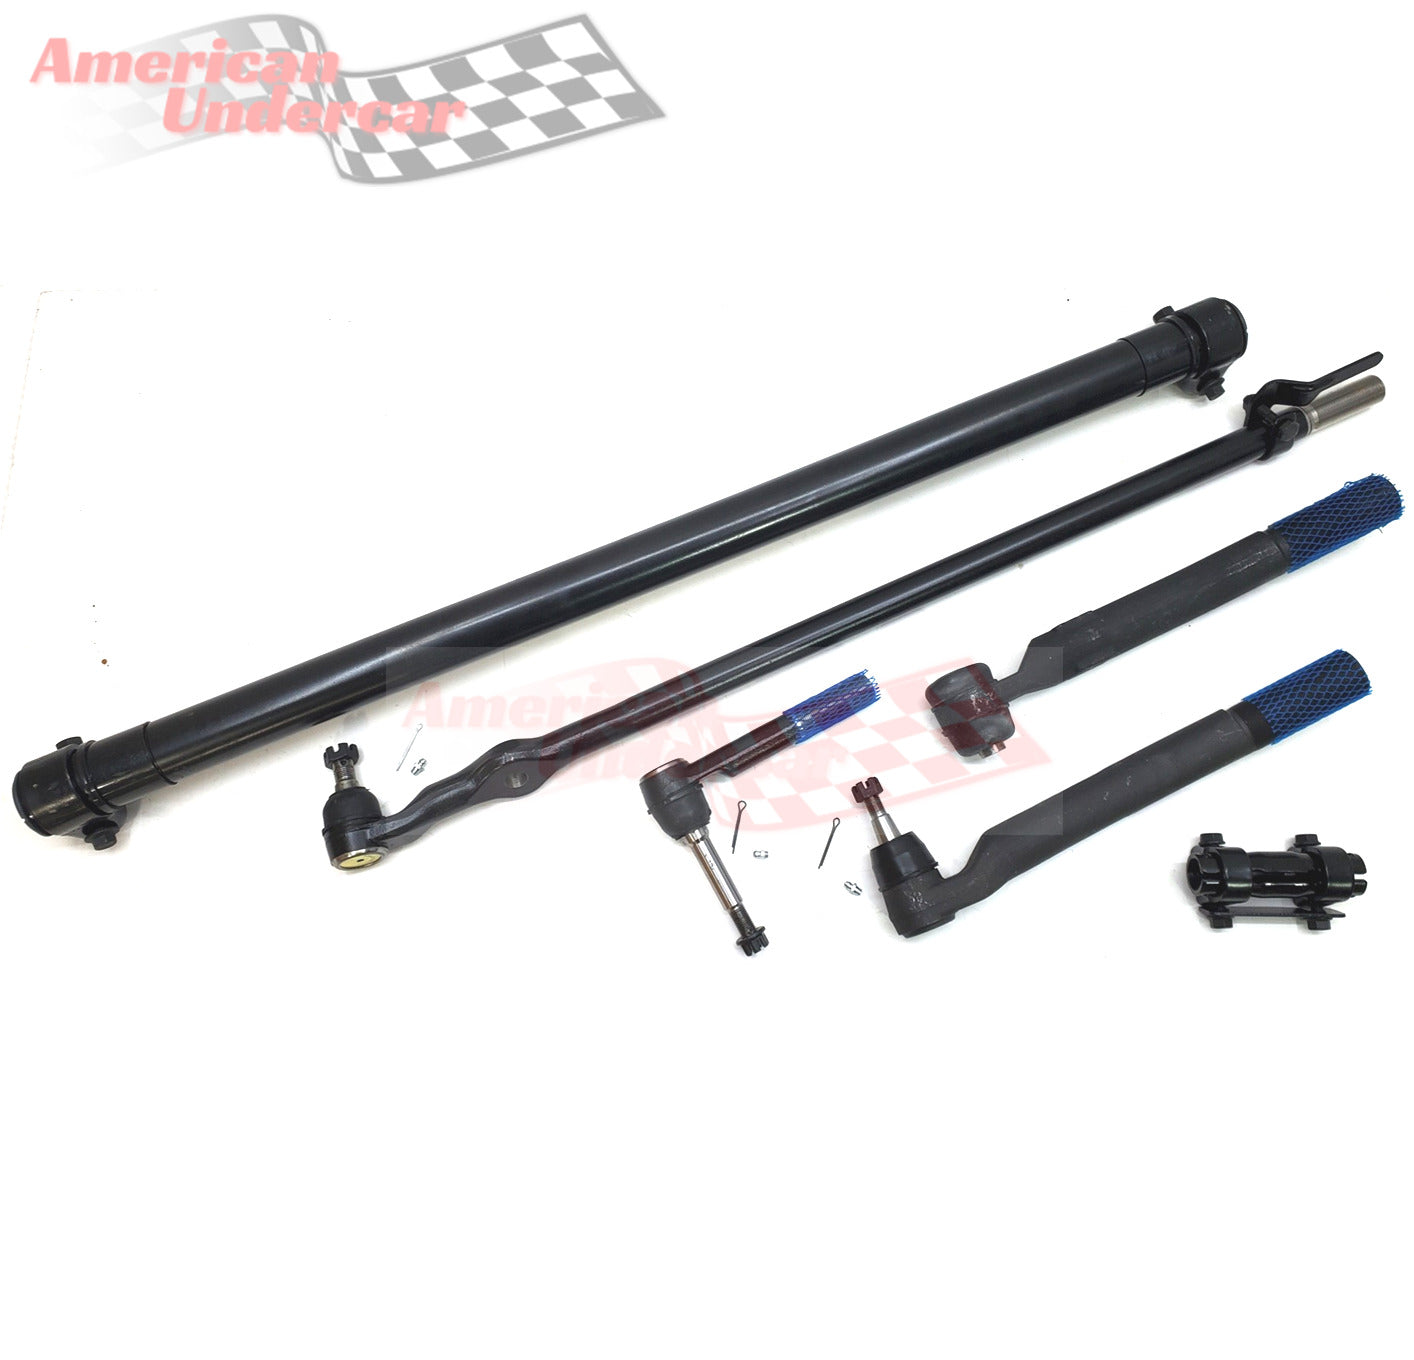 Lifetime Steering and Suspension Kit for 2011-2016 Ford F550 Super Duty 4x4